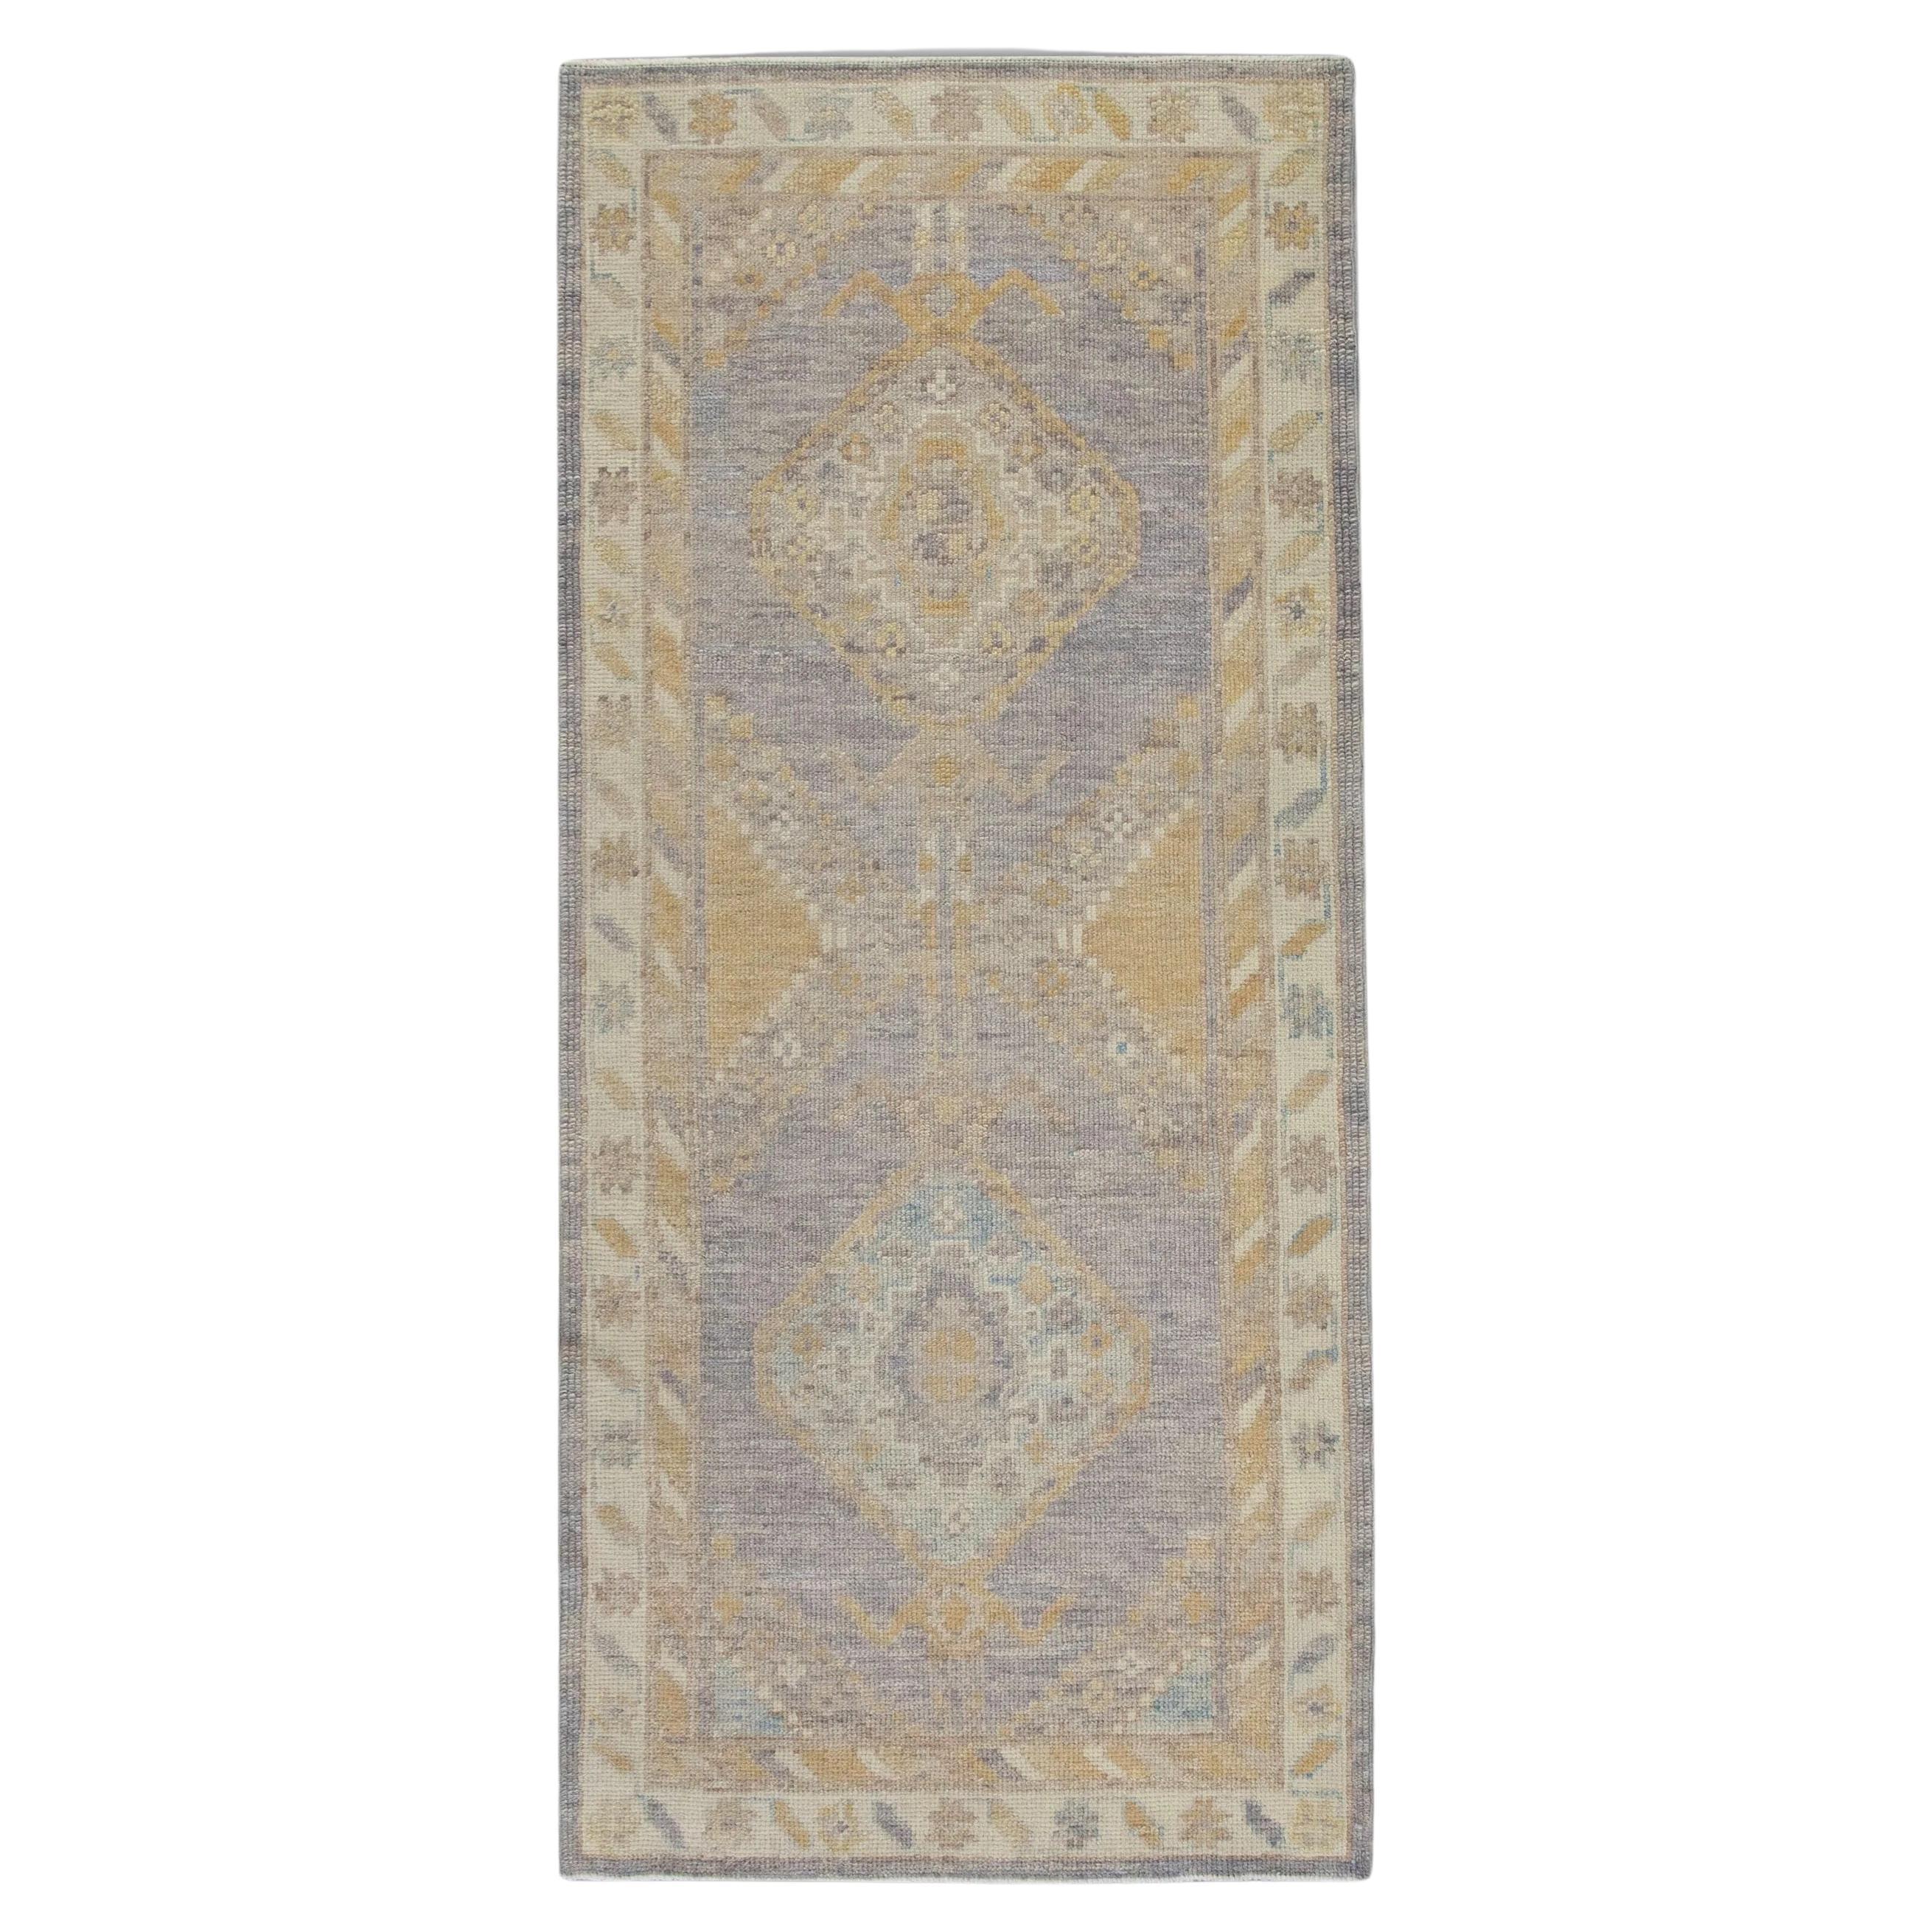 Soft Purple Floral Handwoven Wool Turkish Oushak Rug 3' x 6'6" For Sale